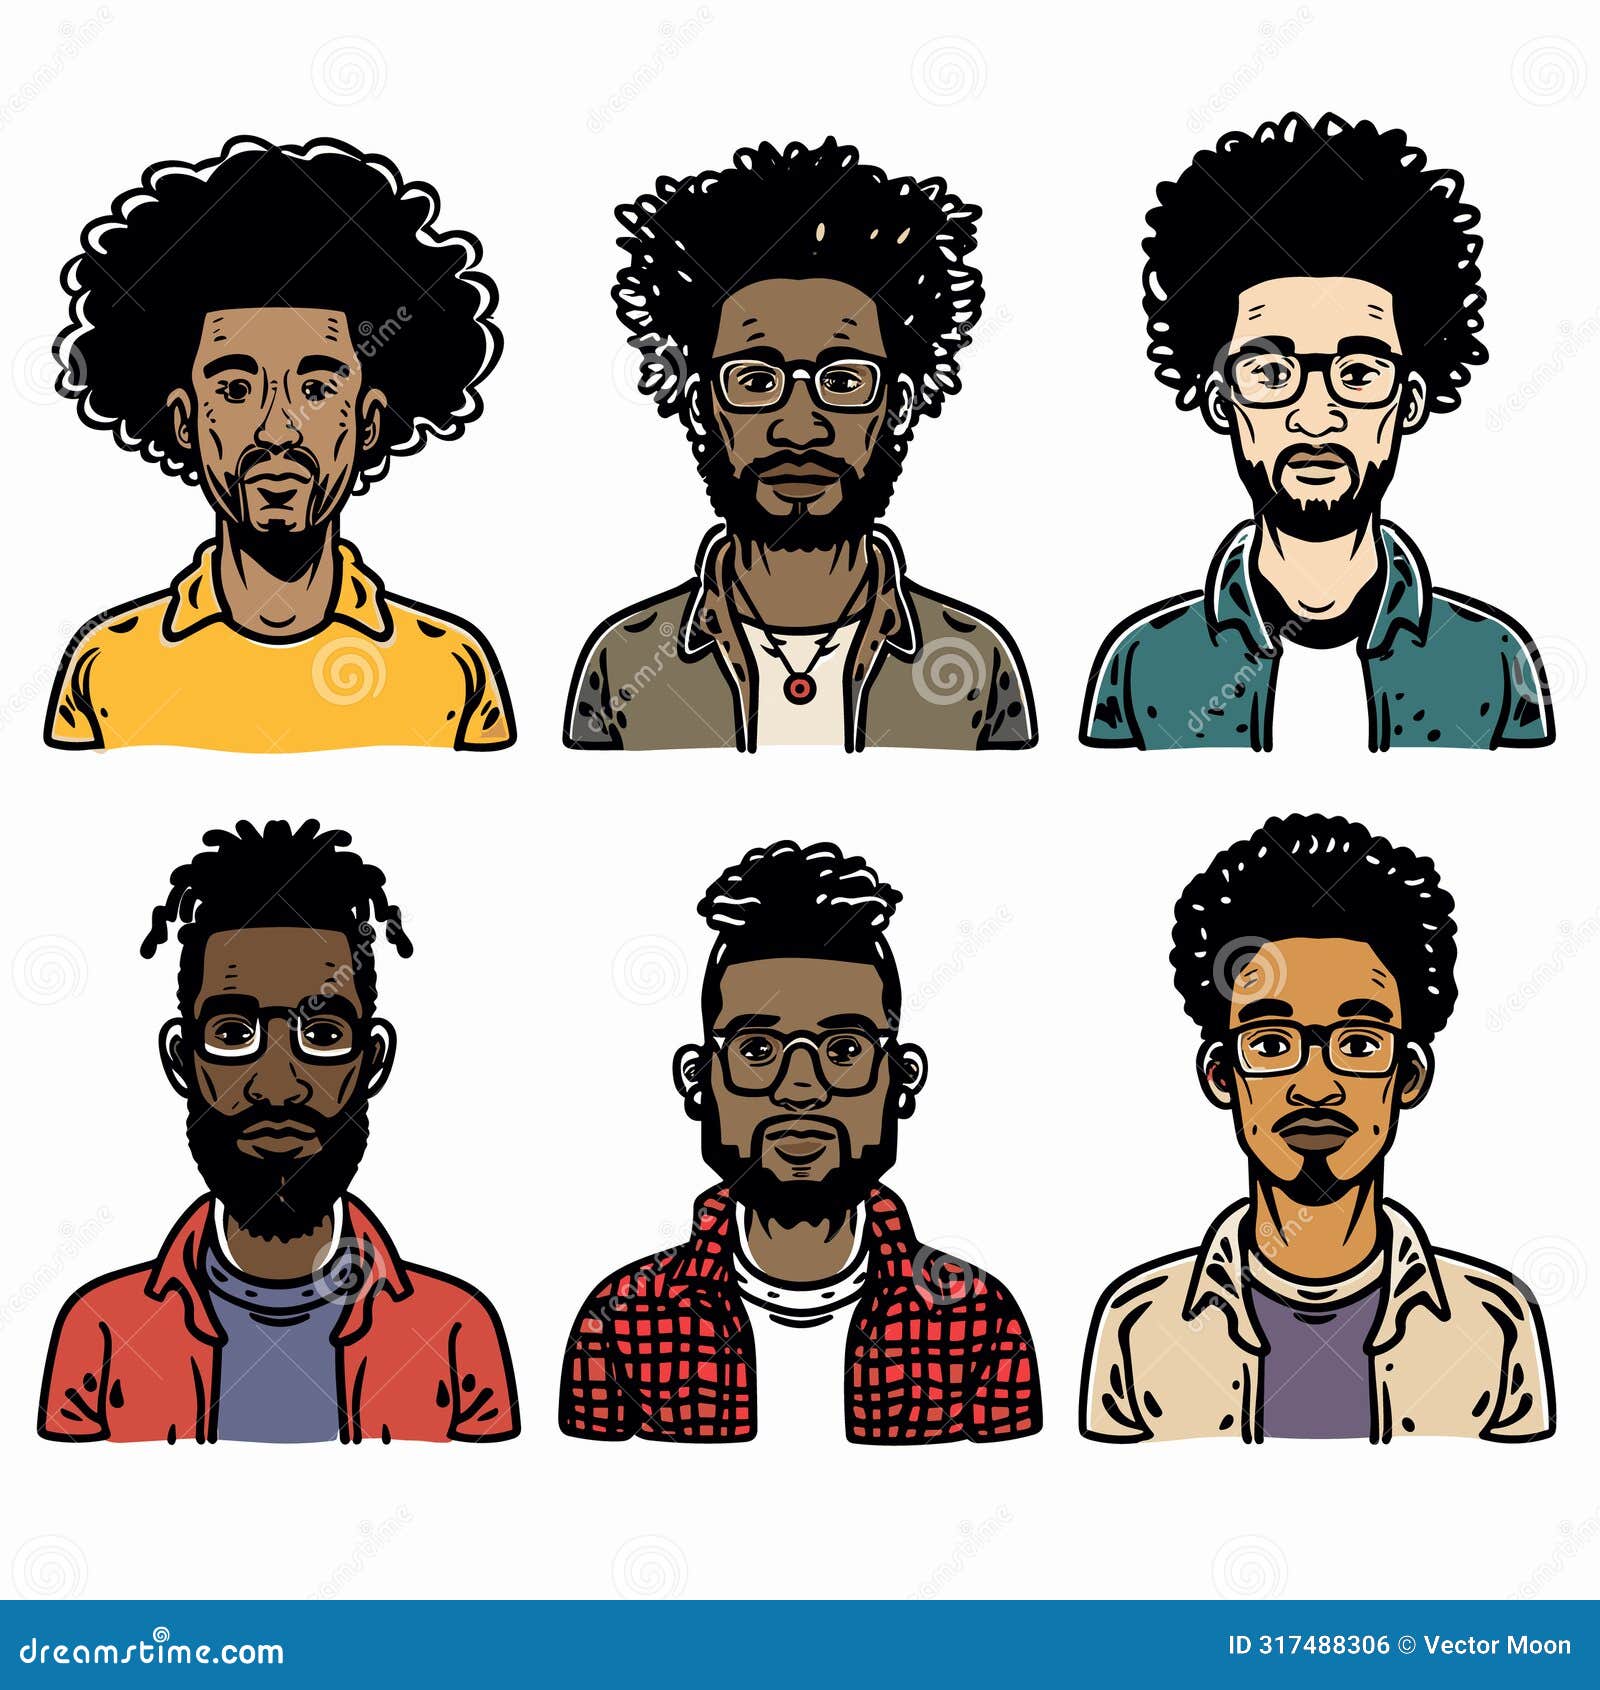 six african american male avatars different hairstyles facial hair, wearing casual outfits